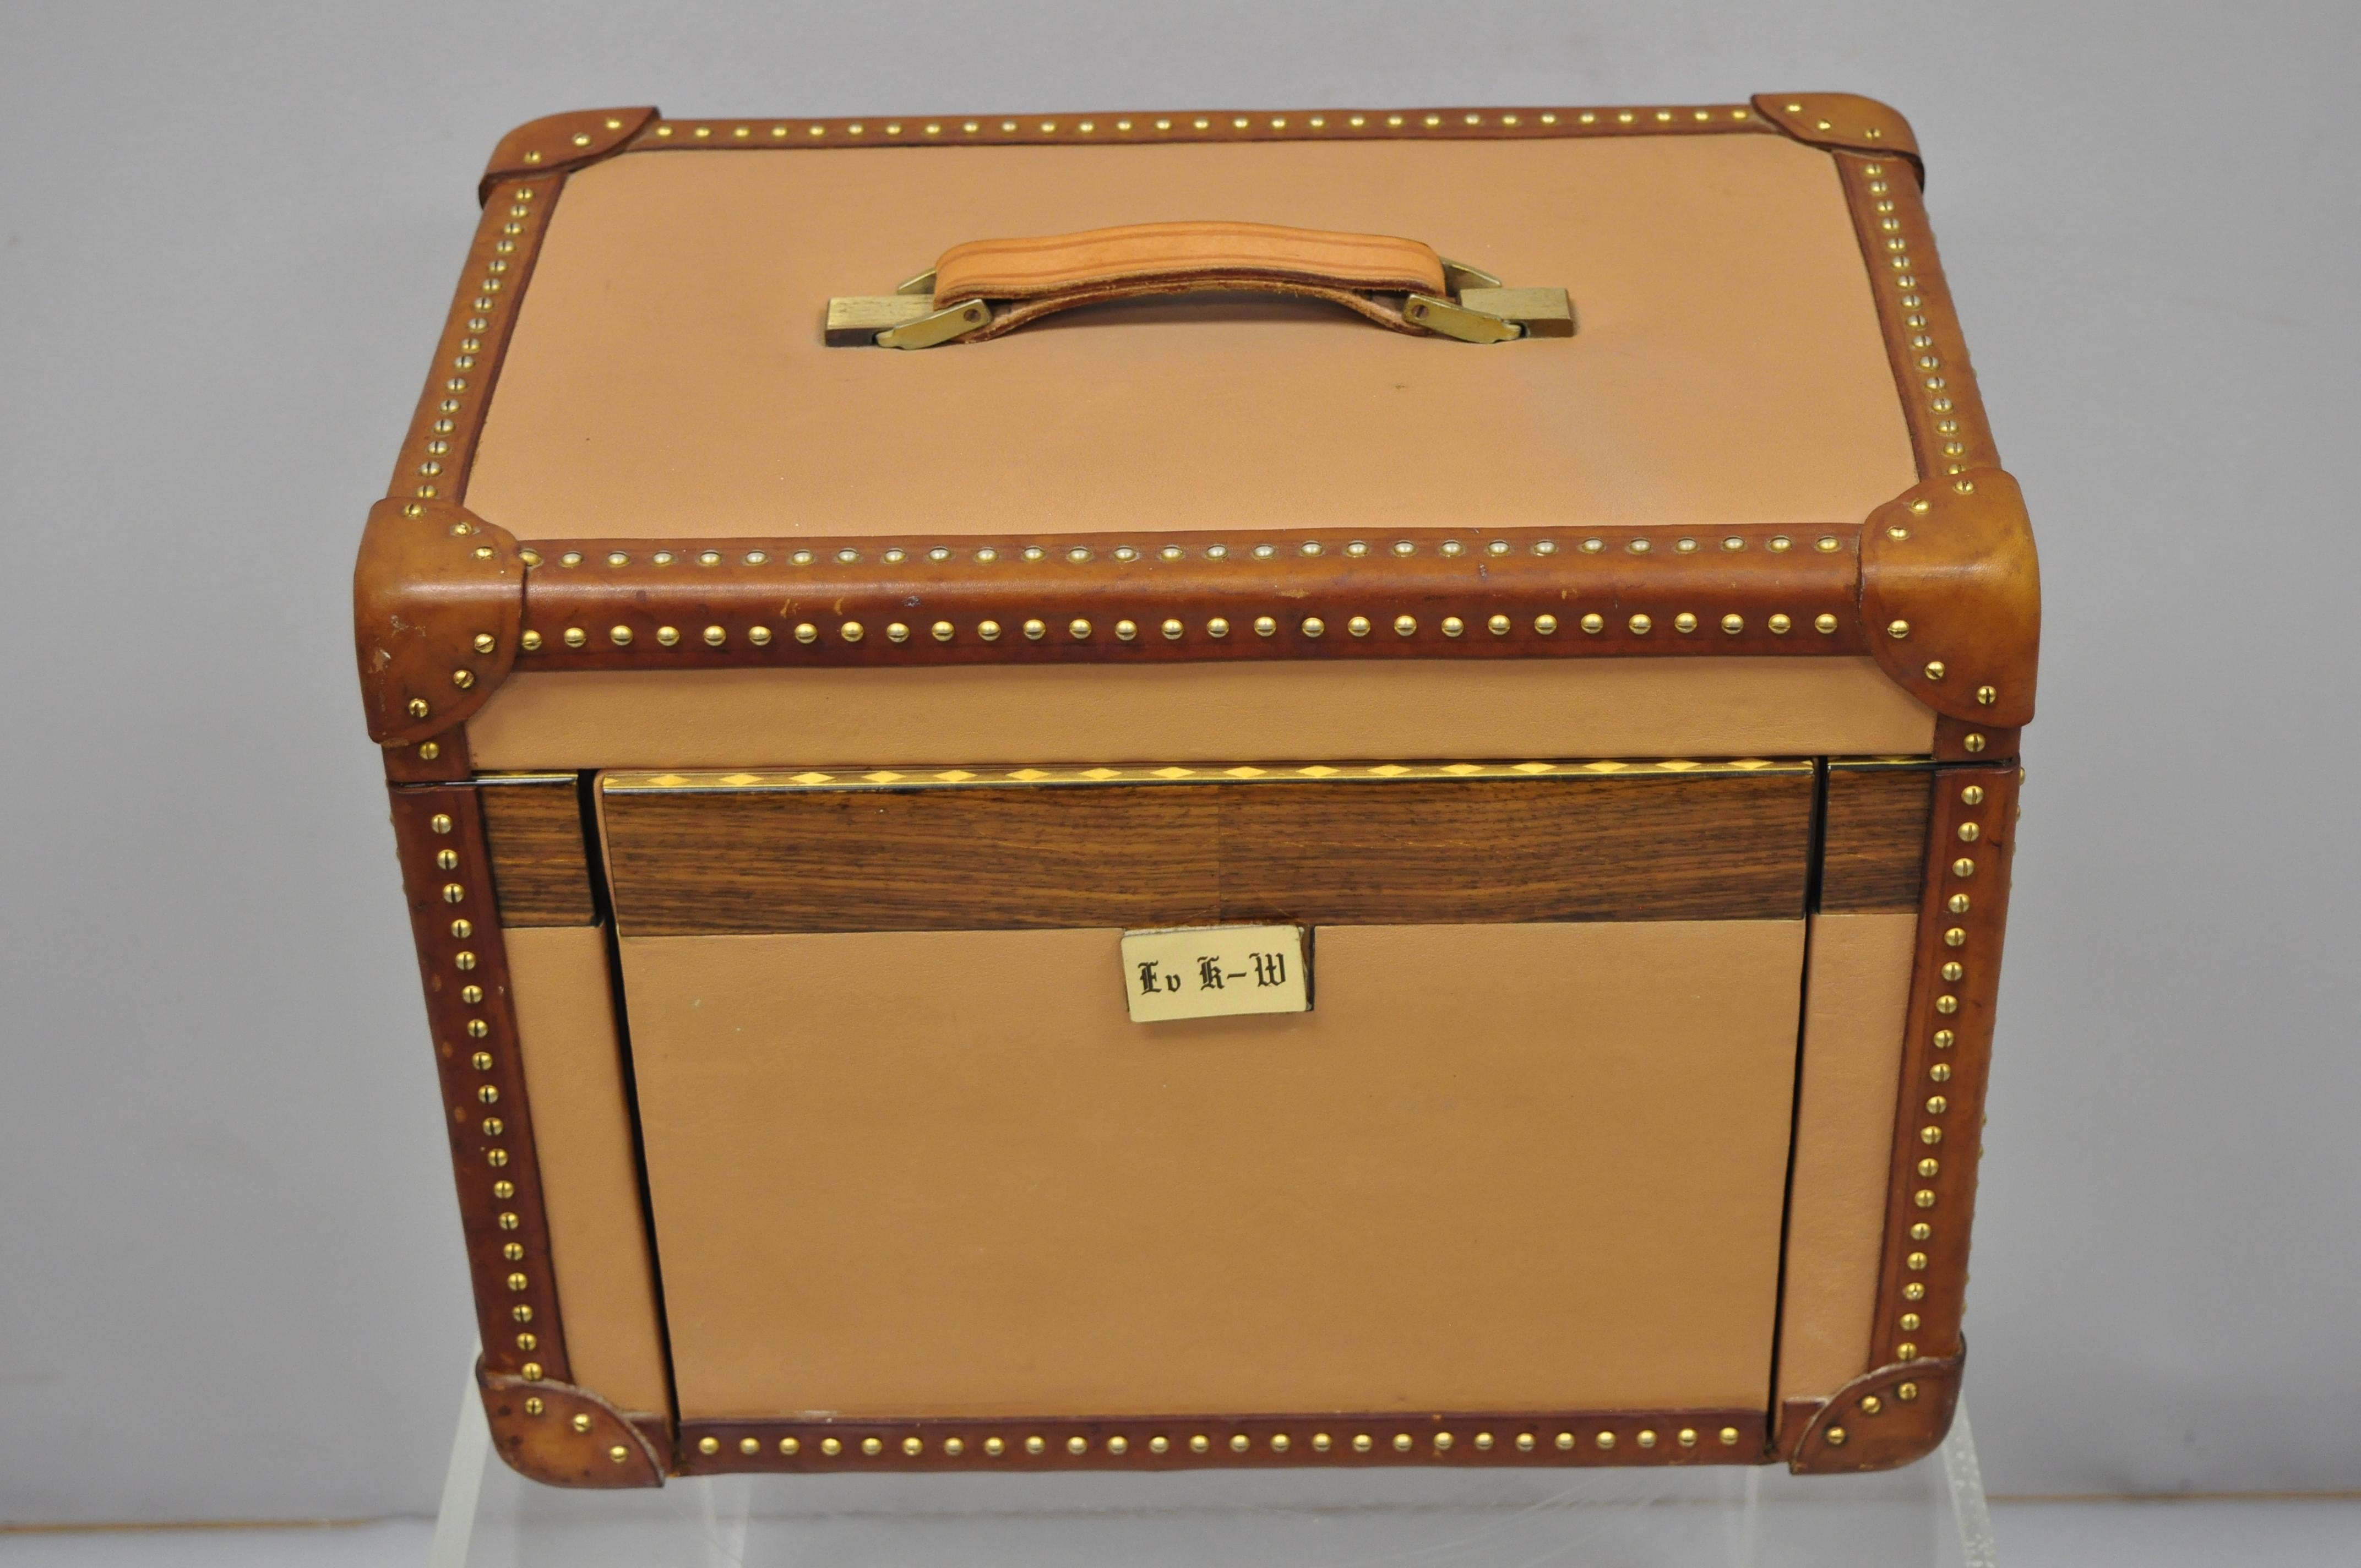 Custom Vintage Italian Leather Toiletry Box Case Travel Trunk Nailhead Trim. Item features brass screw/nailhead trim, brown leather corners and trim, leather frame, mirror interior with leather lining. Custom order. Circa mid to Late 20th Century.